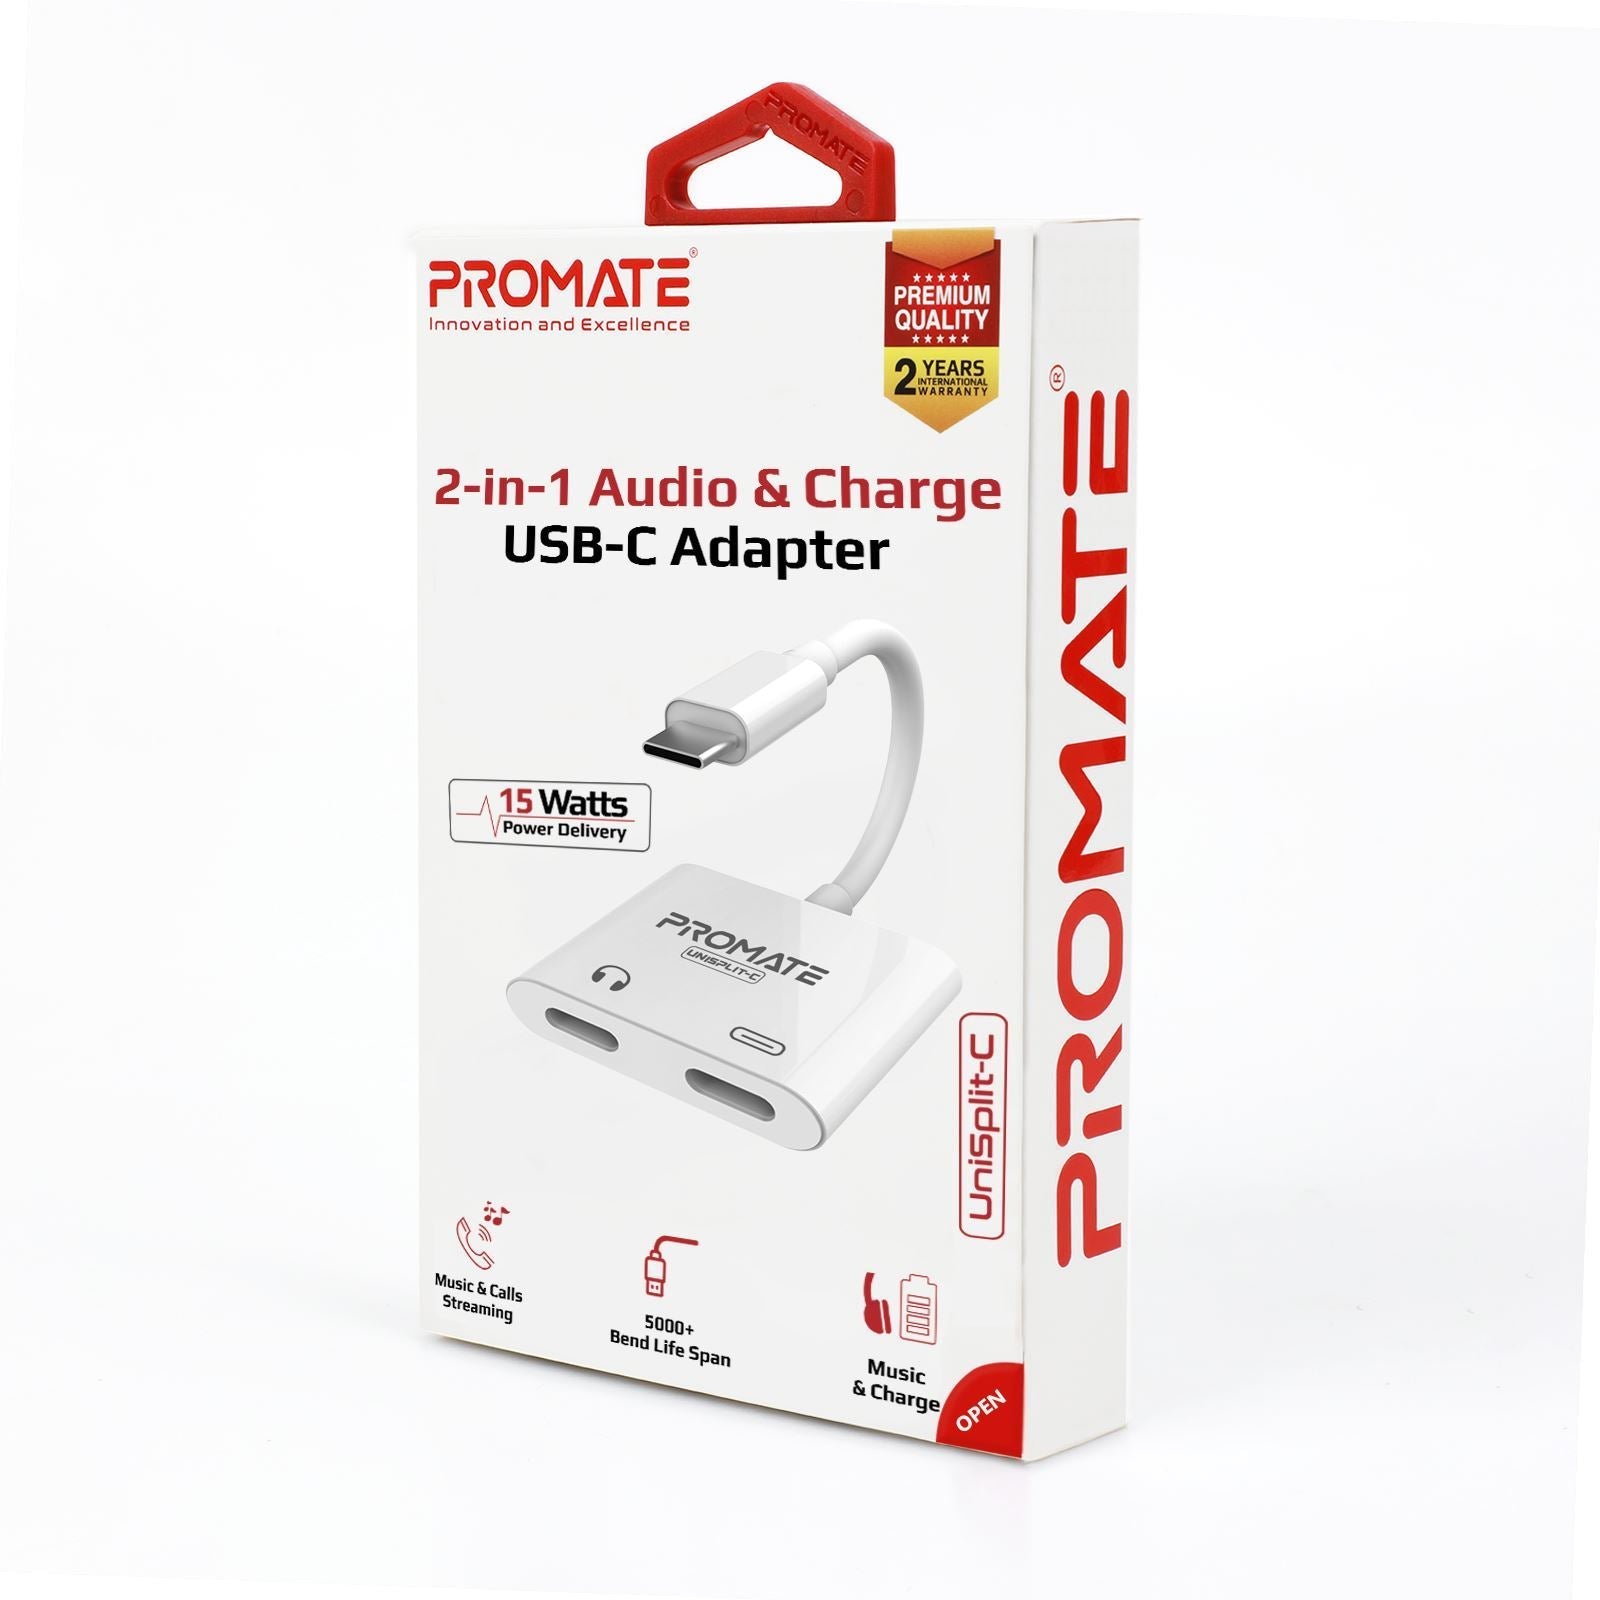 UNISPLIT-C.WHT - Promate 2-in-1 Audio & Charge USBC Adapter with 15W Power Delivery.